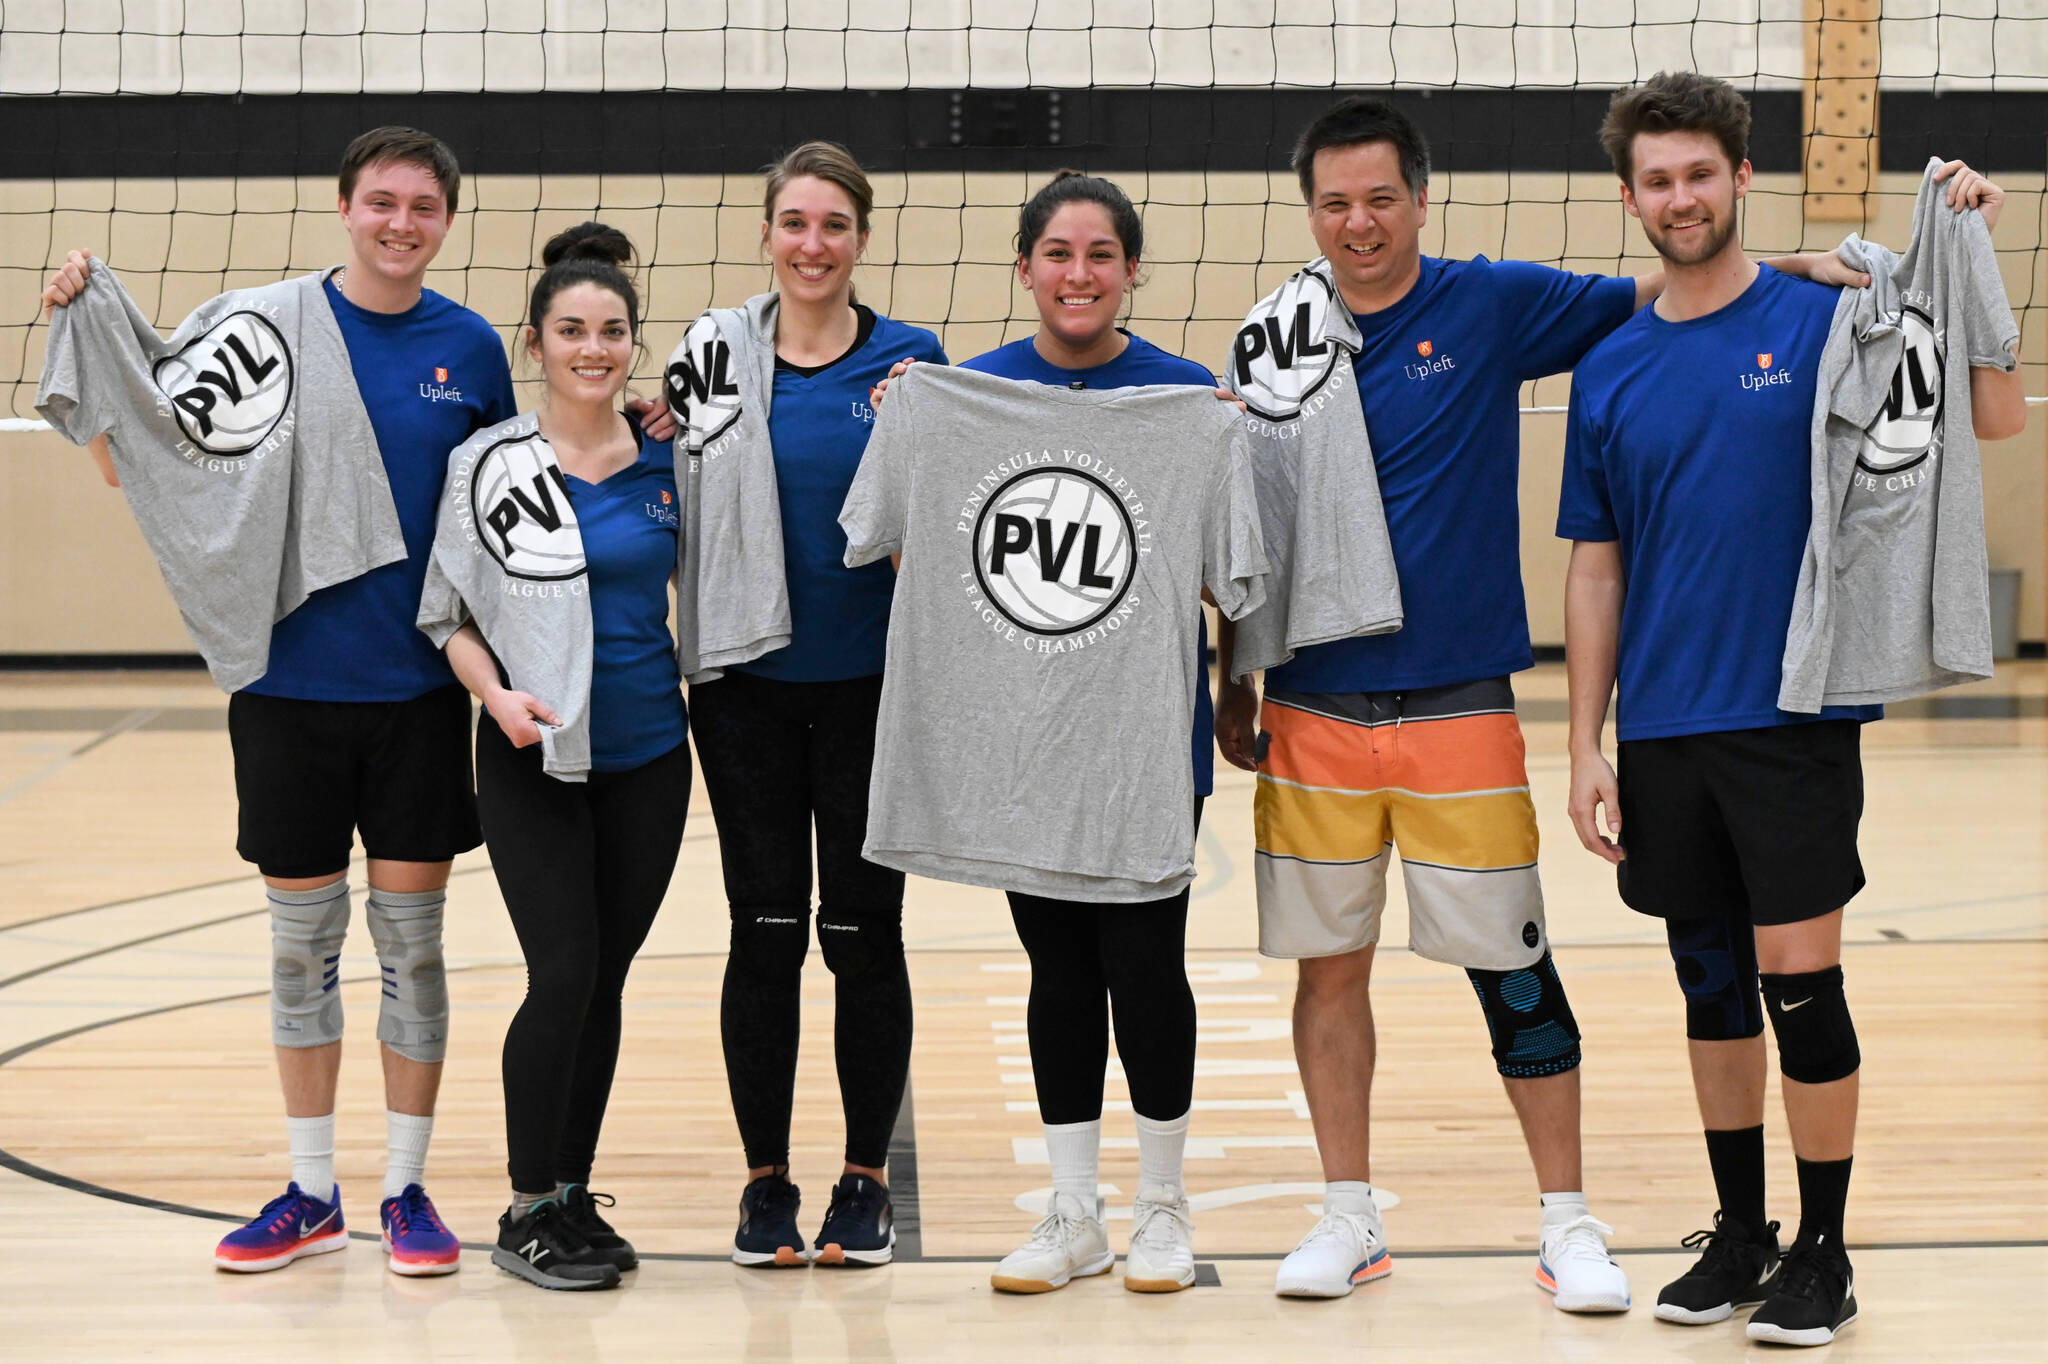 Submitted photo / Upleft teammates celebrate a Peninsula Volleyball League A Division championship in early March. They include, from left, Josh Miller, Jaclyn Duenas, Stina Janssen, Kix McArthur, Matt Miller and Nick Koller. Not pictured is Mindy King.